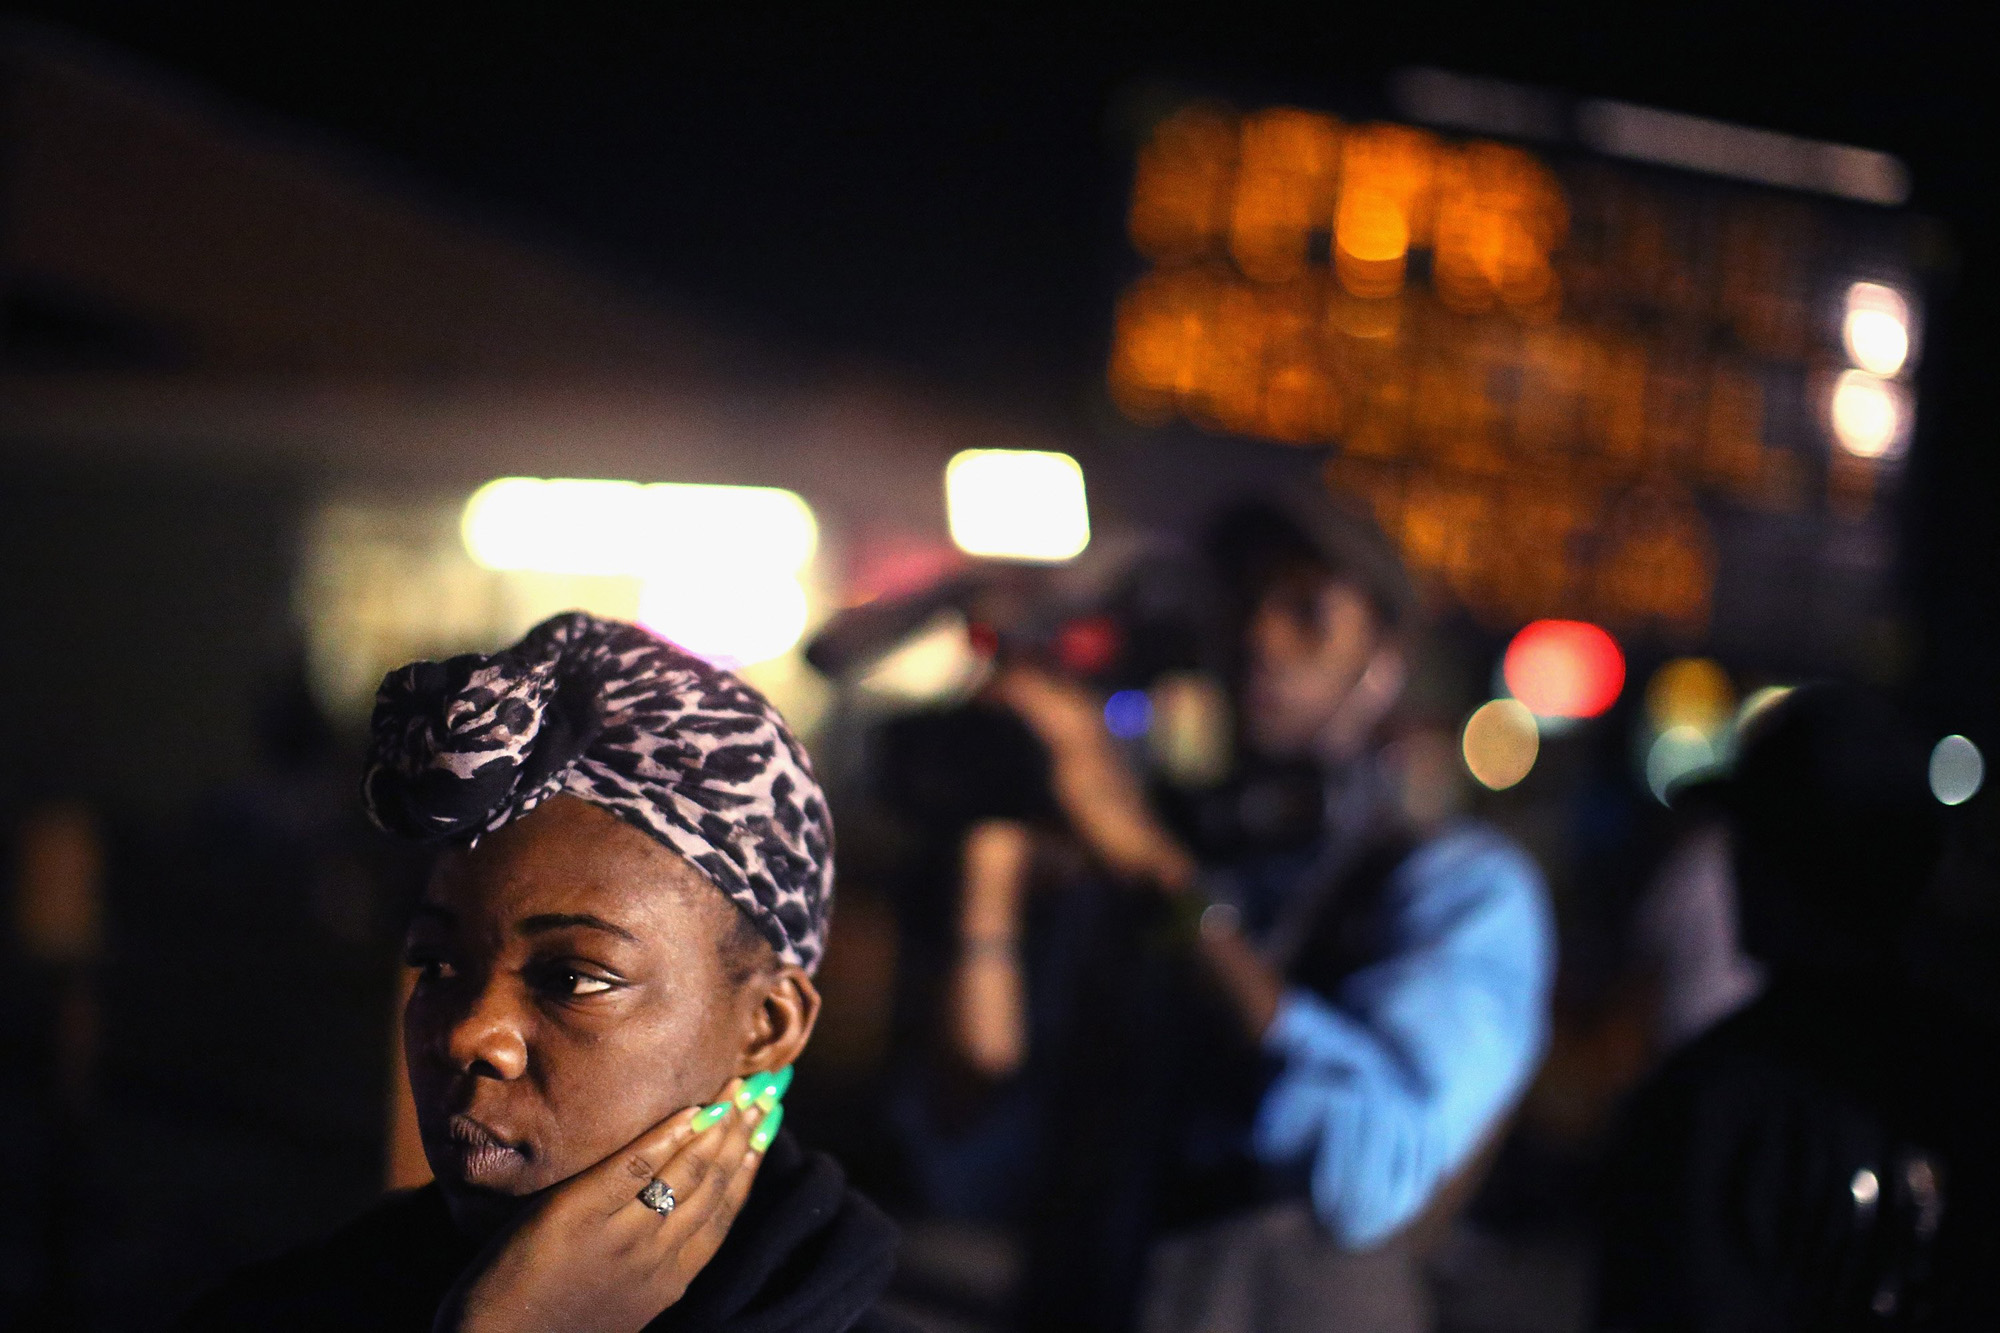 Demonstrators protest the killing of teenager Michael Brown on Aug. 20, 2014 in Ferguson, Mo.